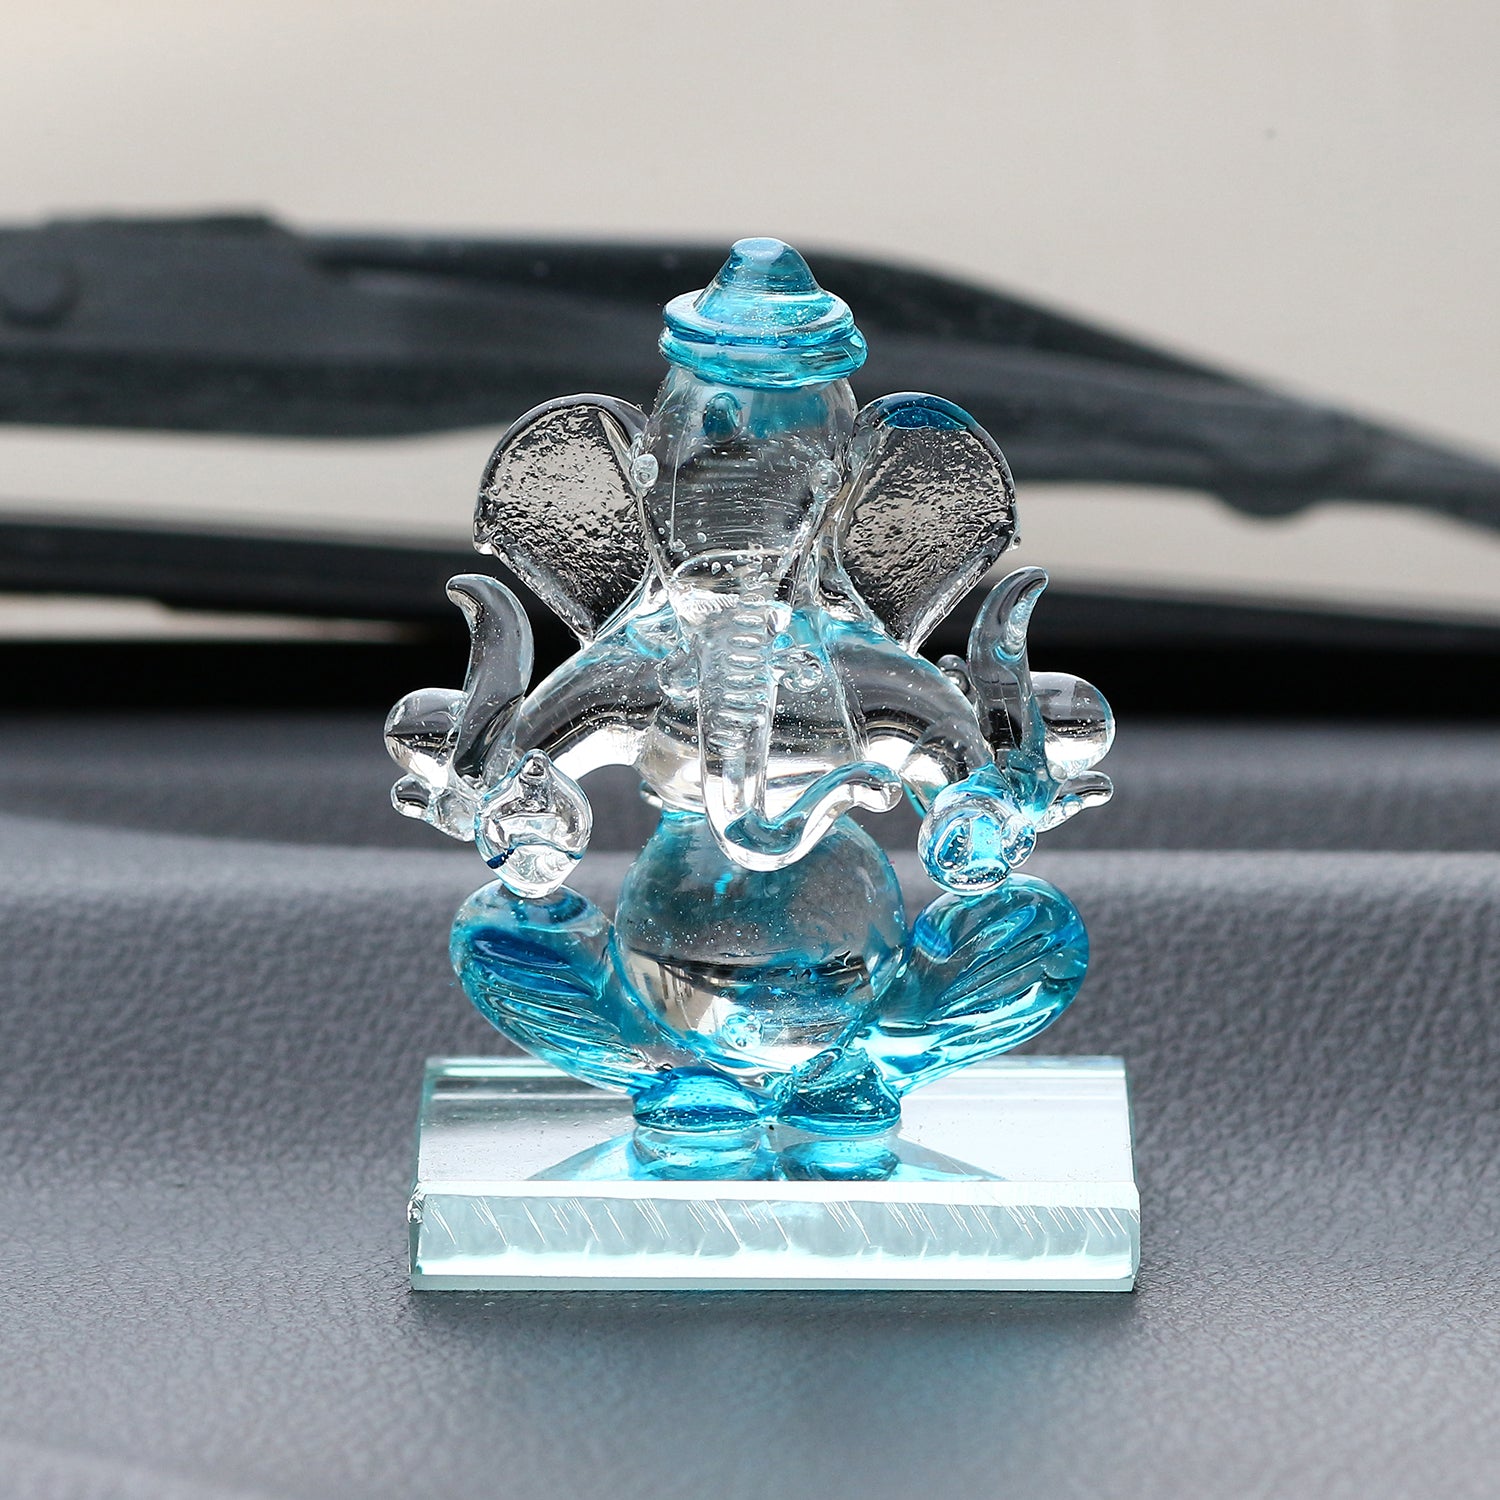 Sky Blue Transparent Double Sided Crystal Ganesha Idol For Home, Office and Car Dashboard